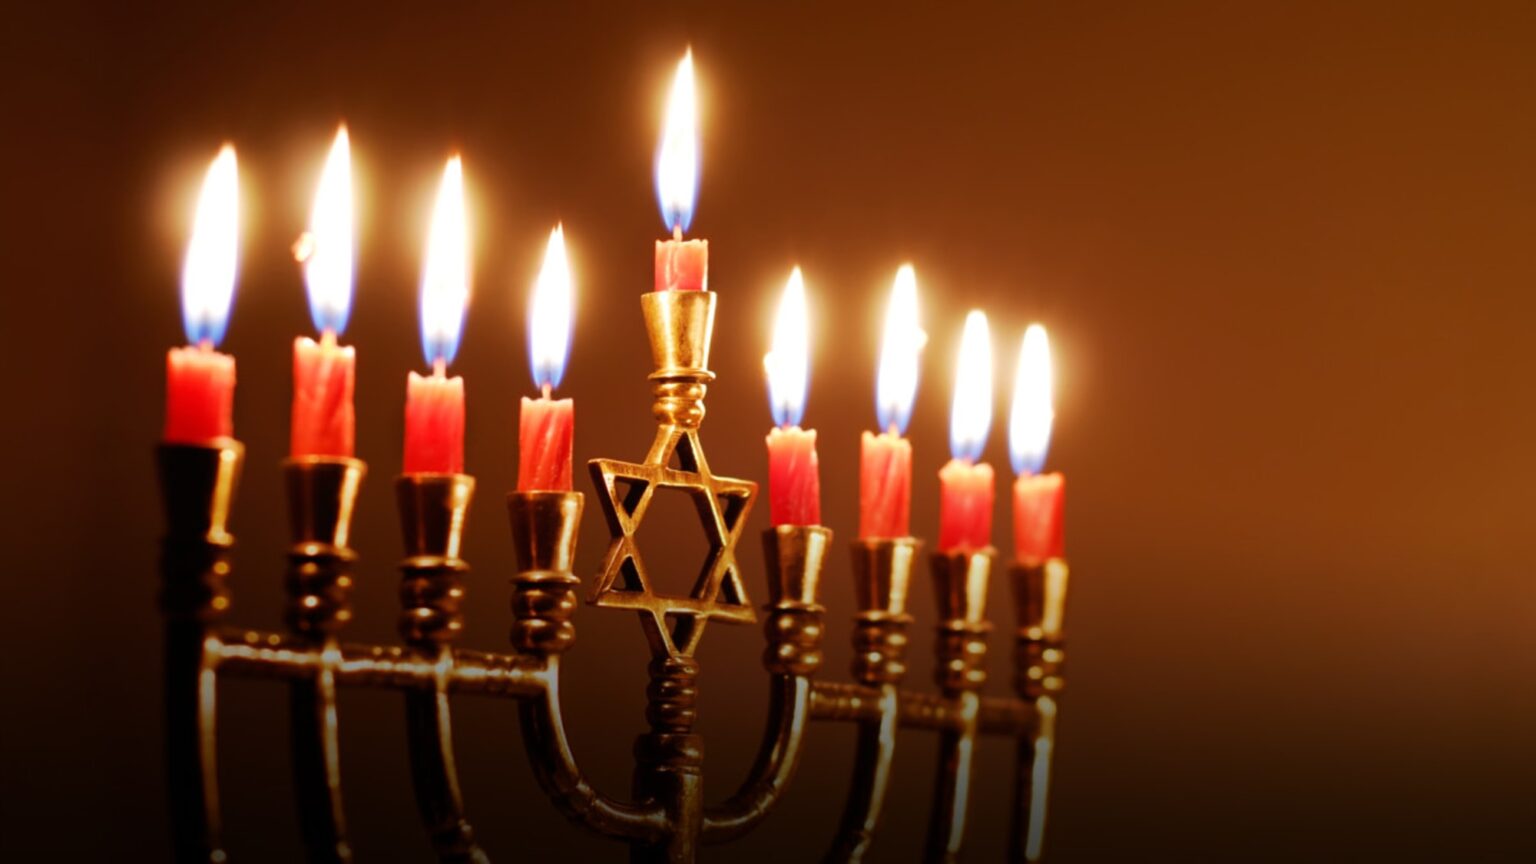 Hanukkah season has officially begun and Jewish people all over the world have lit the first candle on their menorahs. How are people celebrating in 2020?